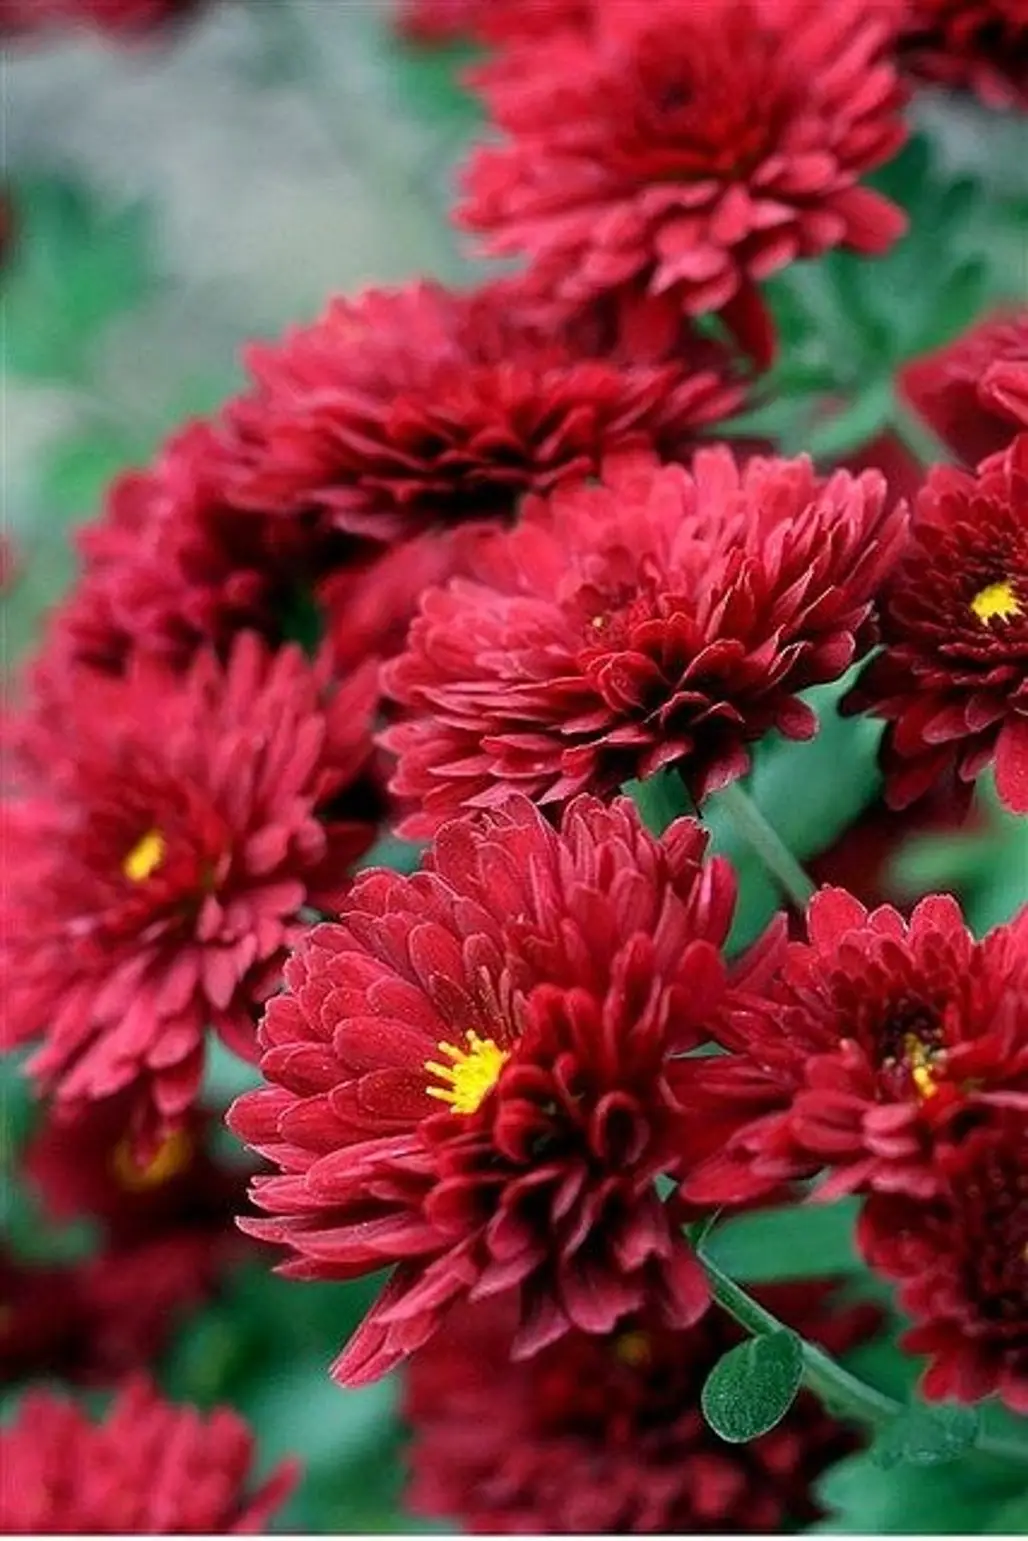 Mums Are the Perfect Fall Flower